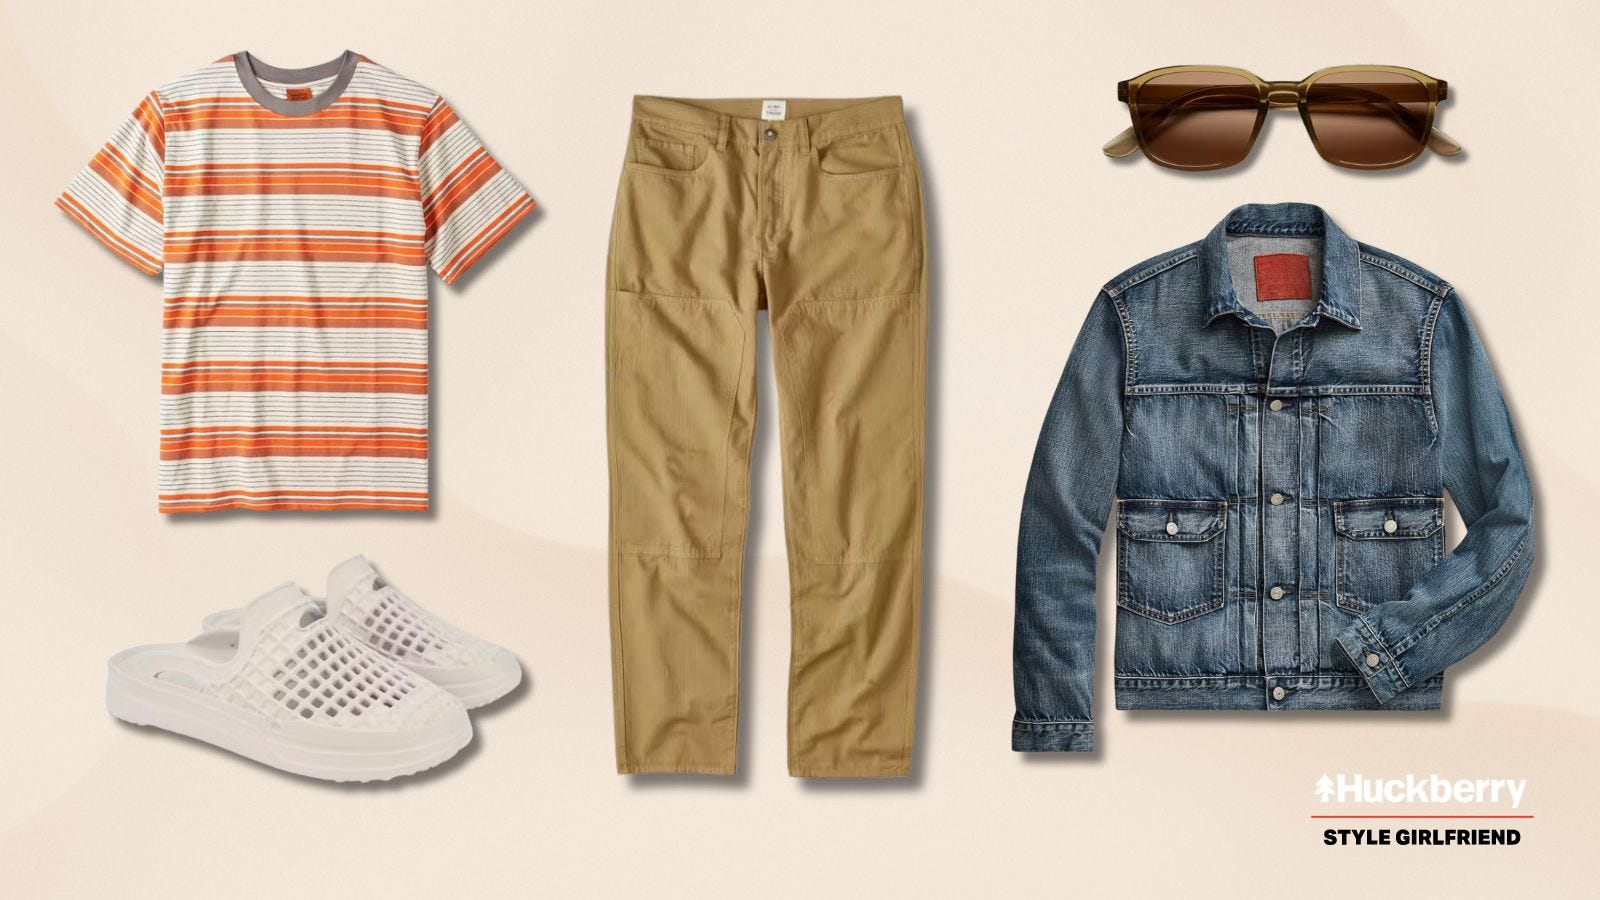 casual men's outfit featuring linen workwear pants, a striped orange t-shirt, denim jacket, sunglasses, and white slip-on shoes